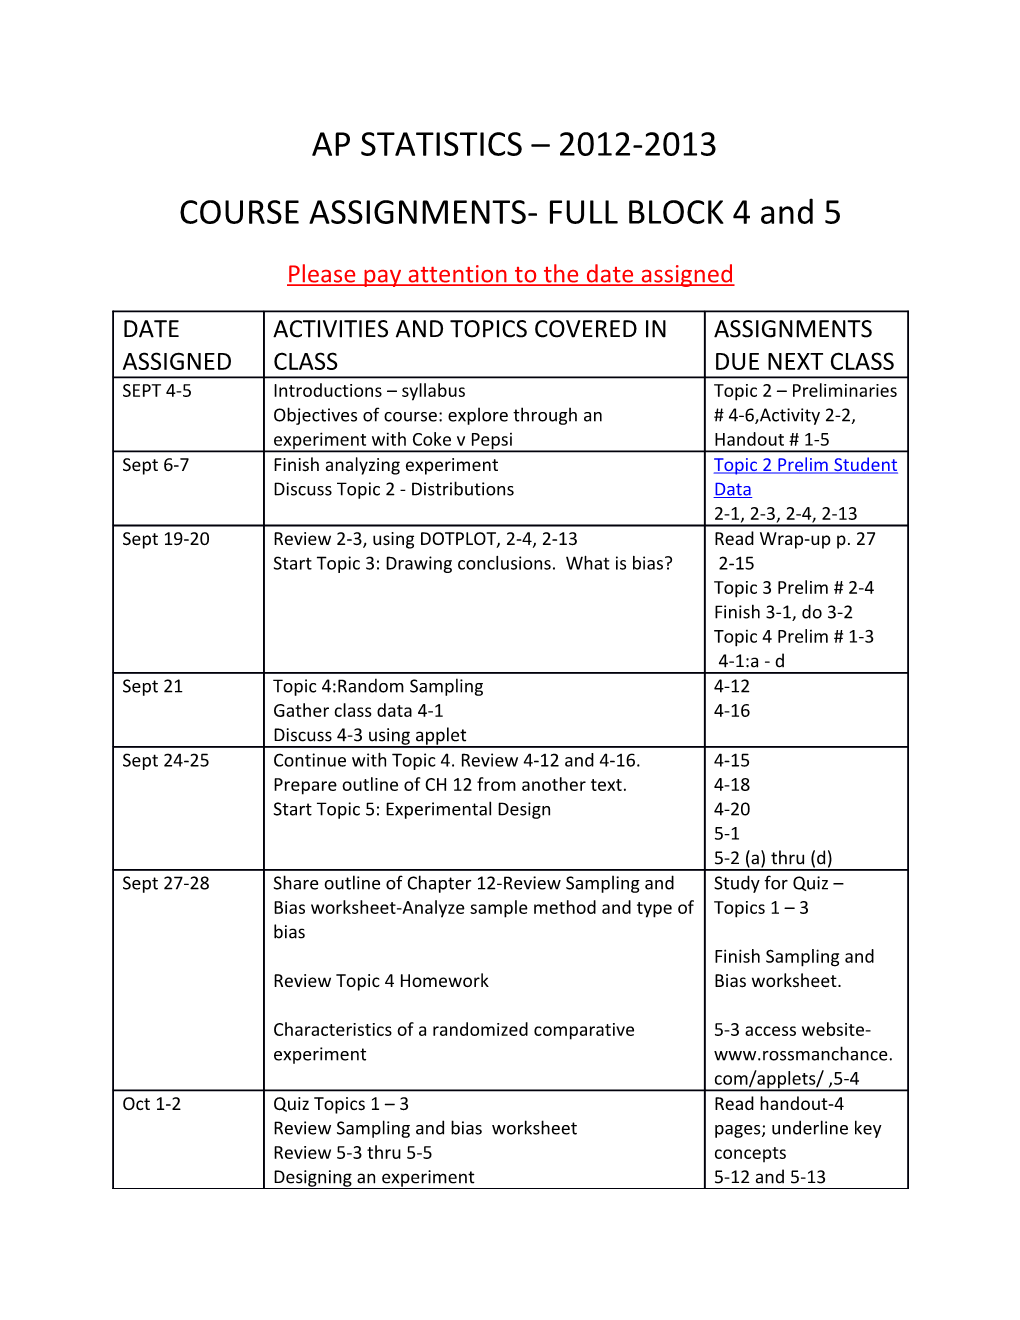 COURSE ASSIGNMENTS- FULL BLOCK 4 and 5